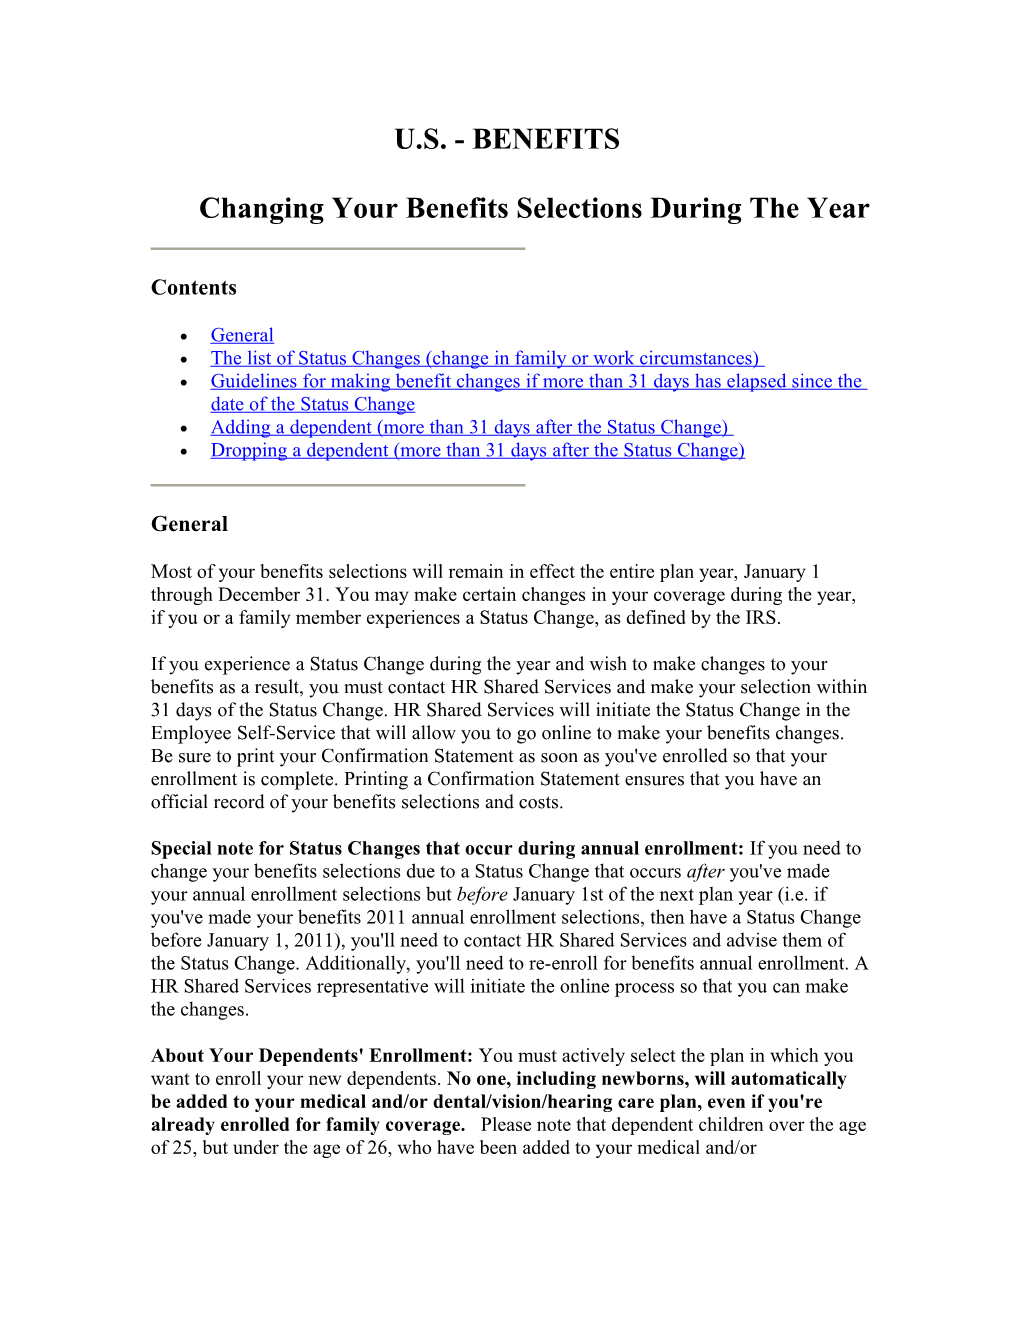 U.S. - BENEFITS Changing Your Benefits Selections During the Year